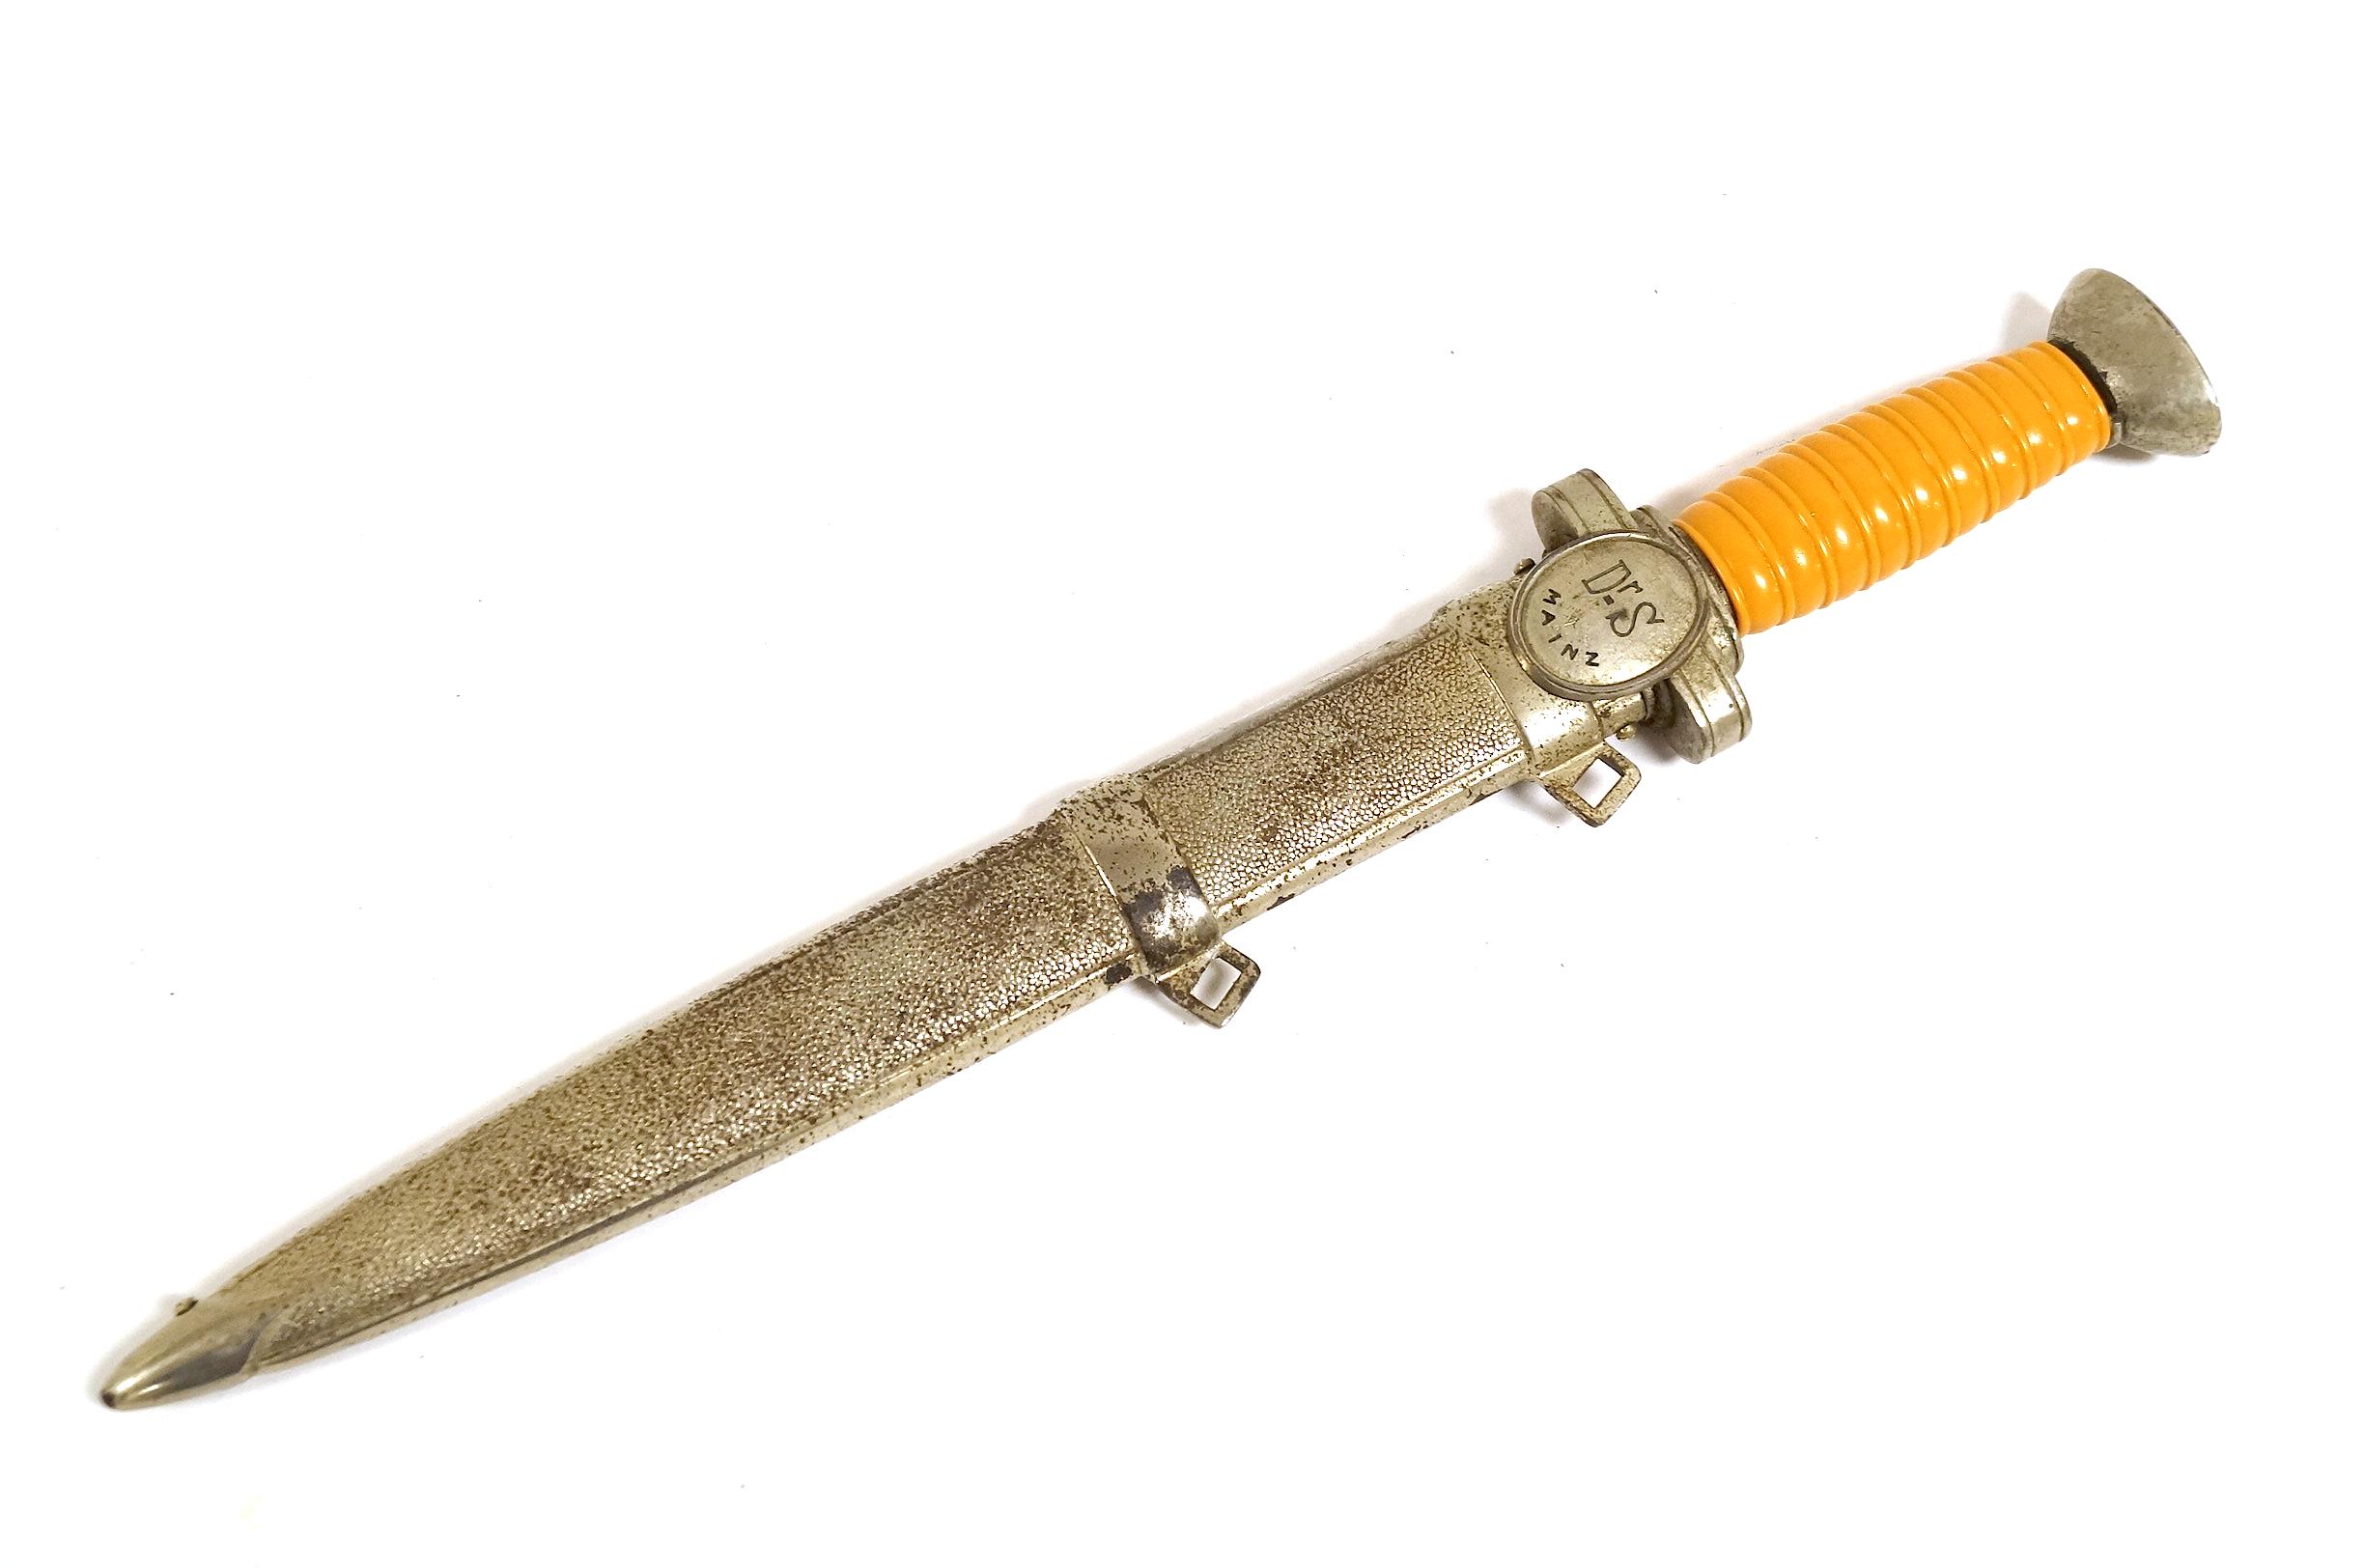 Personalized "Dr. S Mainz" German Red Cross DKR Nazi Leader's Dagger w/ Scabbard